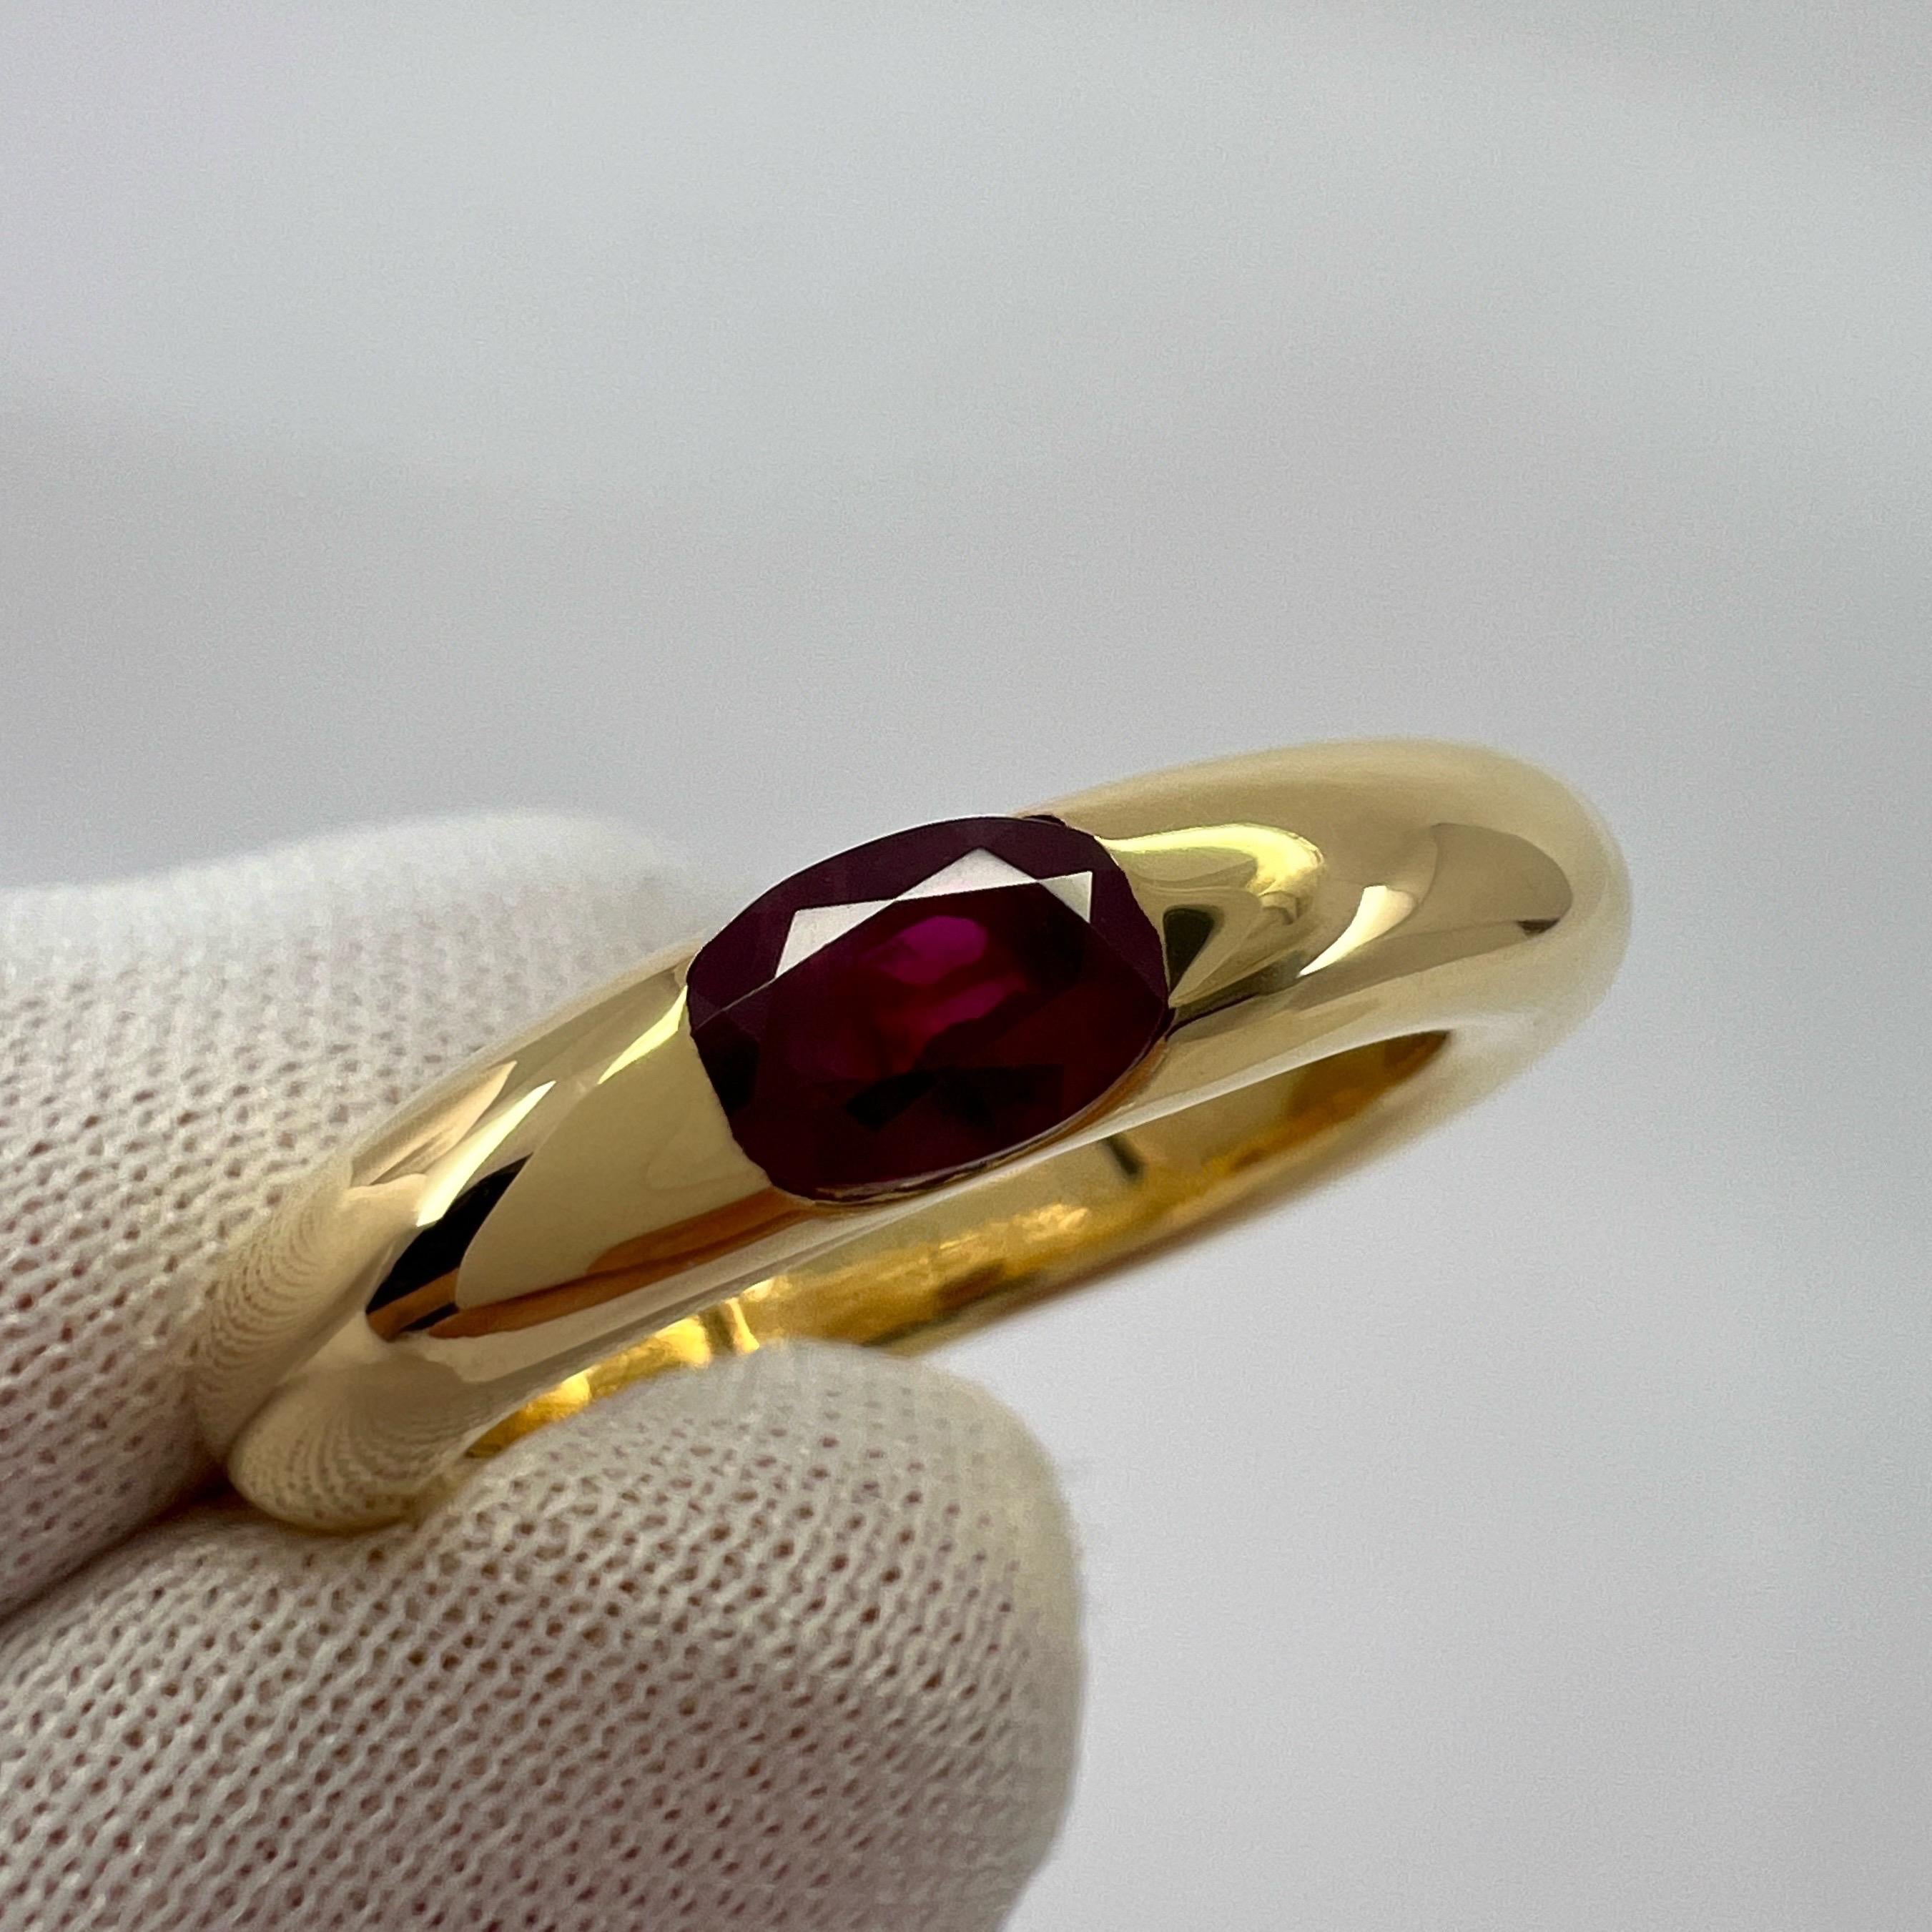 Vintage Cartier Deep Red Ruby Ellipse 18k Yellow Gold Oval Solitaire Ring 52 US6 2